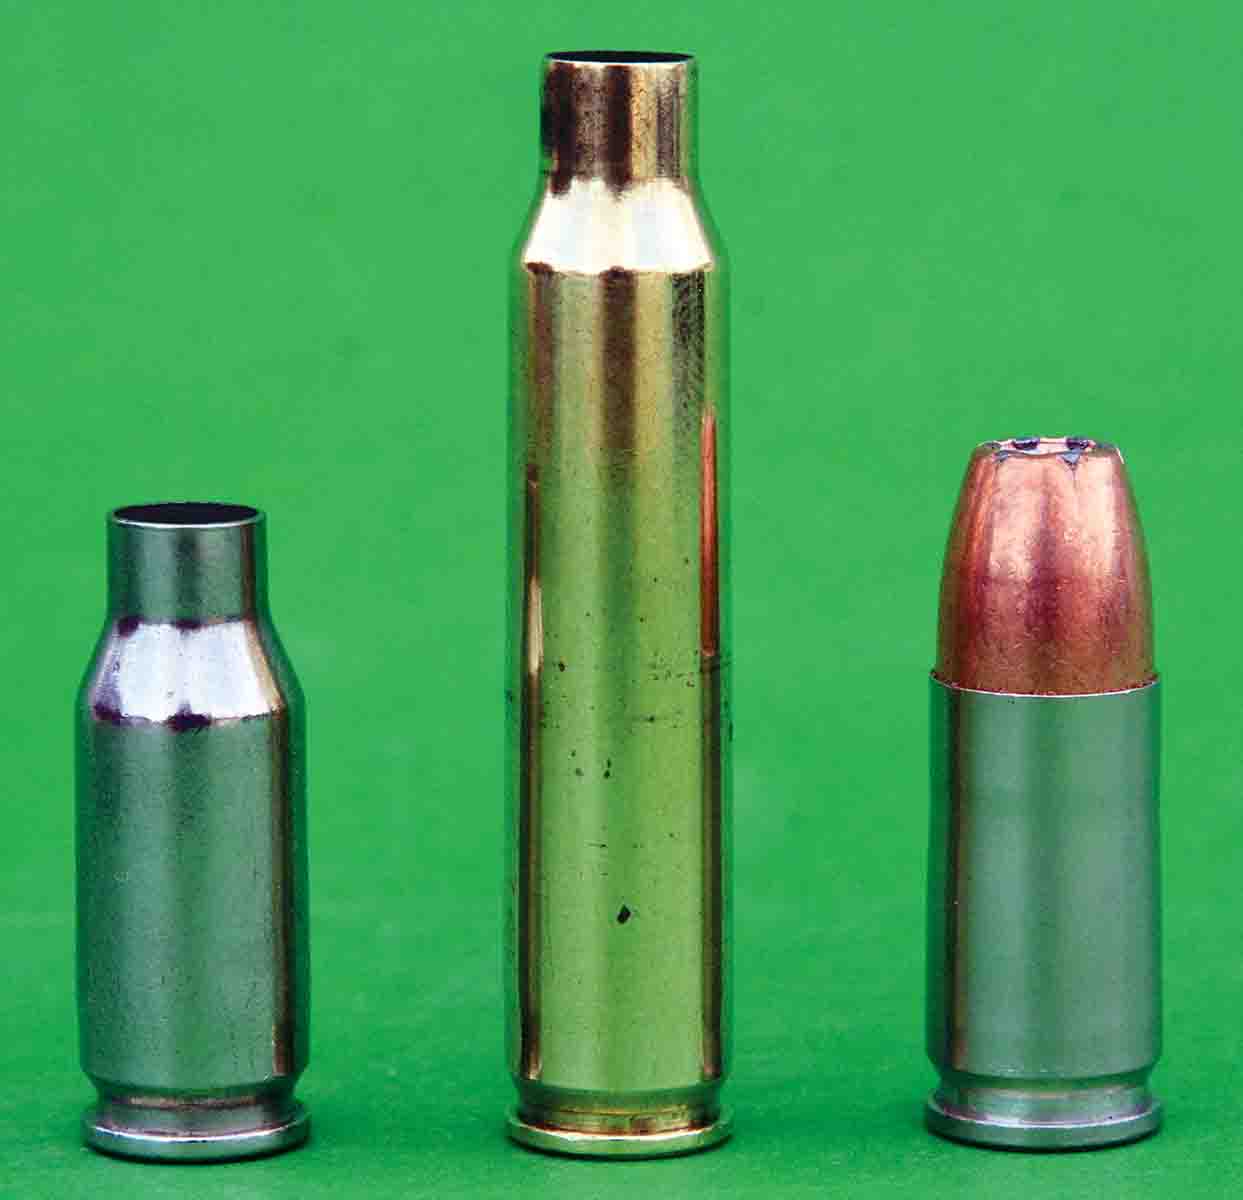 The 22 TCM case (left) is based on the 223 Remington case (center). For greater versatility, the 9mm Luger (right) can be used by changing the barrel and recoil spring.